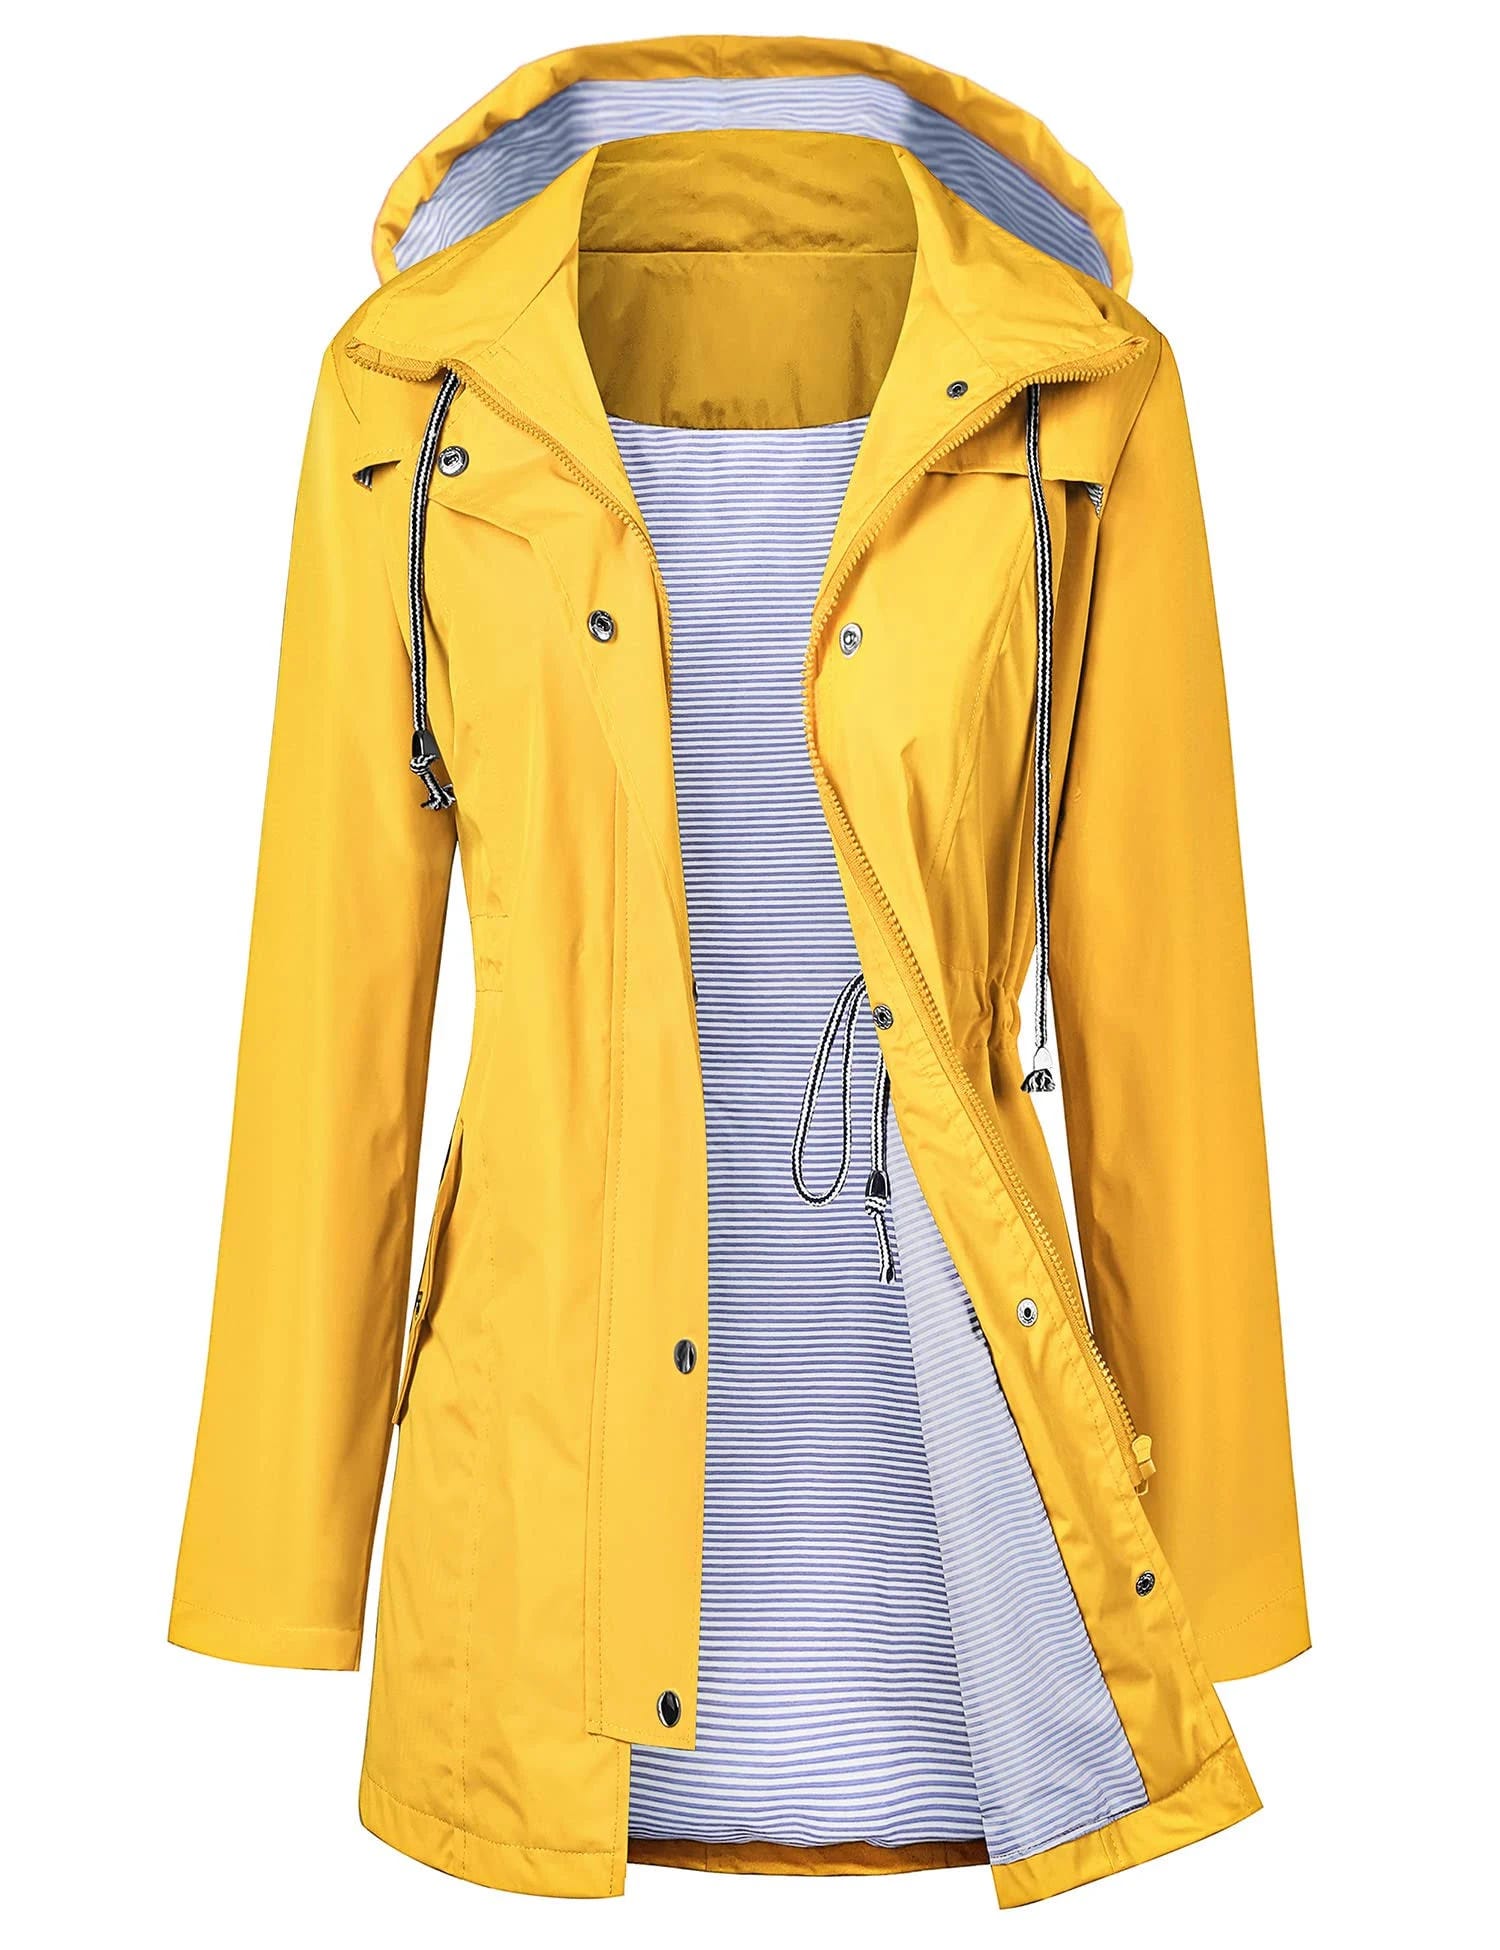 Lightweight and Breathable Yellow Women's Rain Jacket | Image